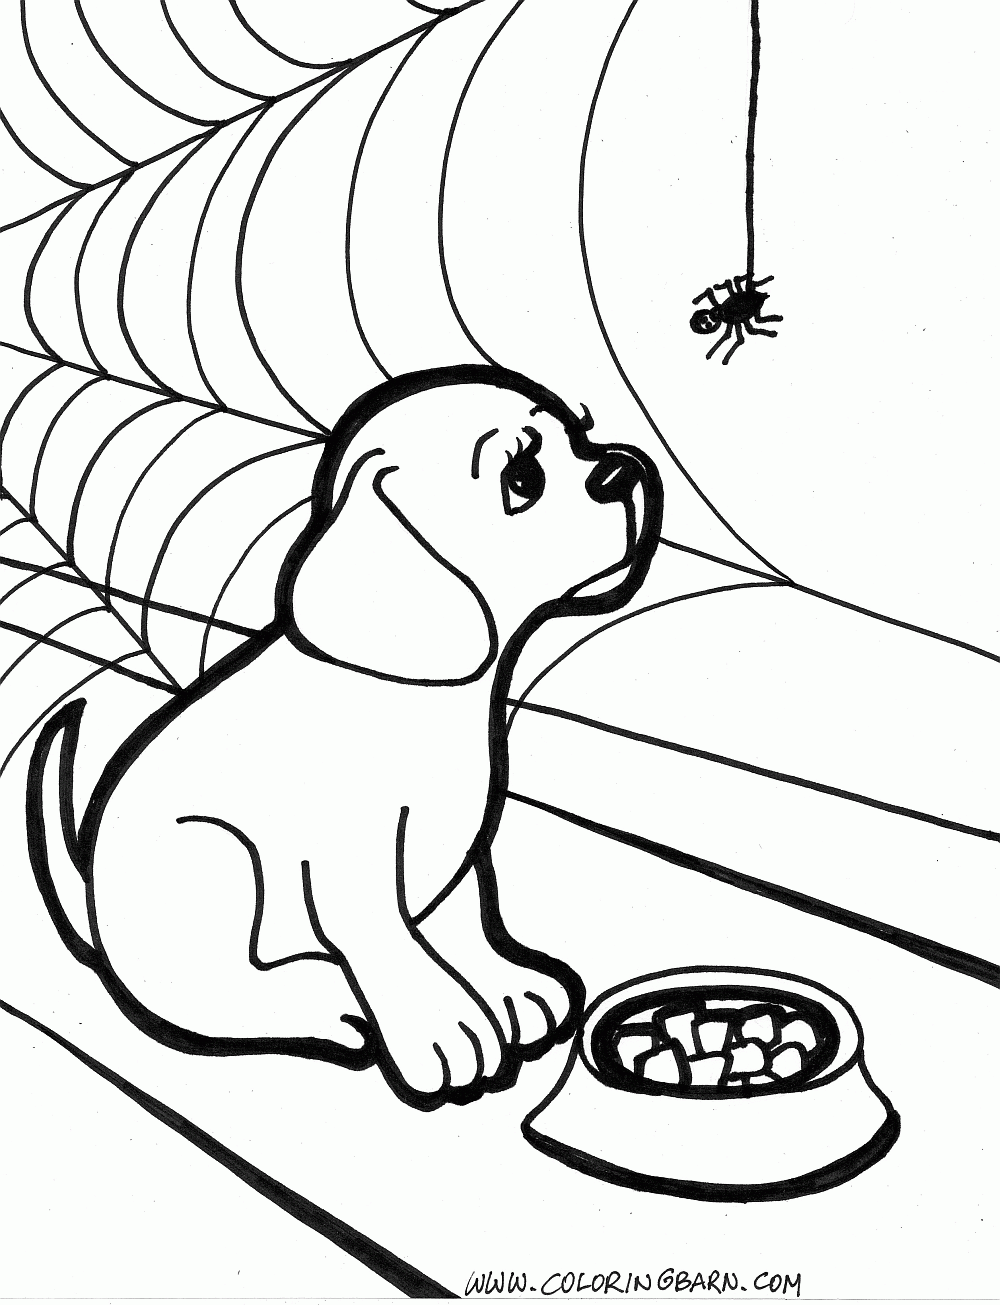 Halloween Dog Coloring Page